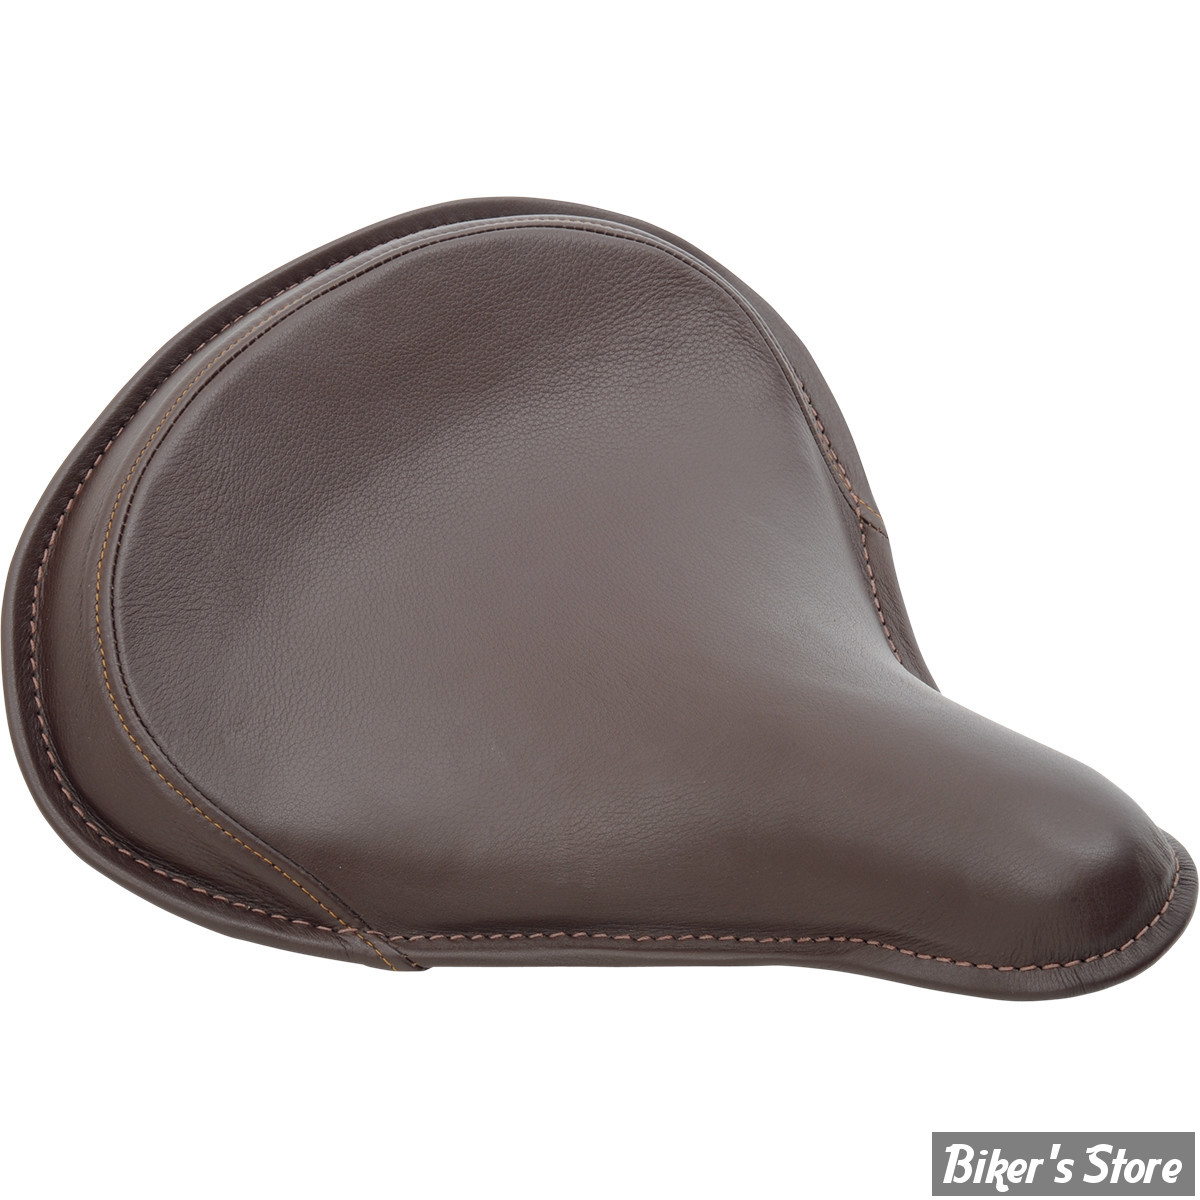 SELLE SOLO UNIVERSELLE - LARGEUR 330MM - DRAG SPECIALTIES - LARGE - BROWN LEATHER W / PERIMETER STITCHED